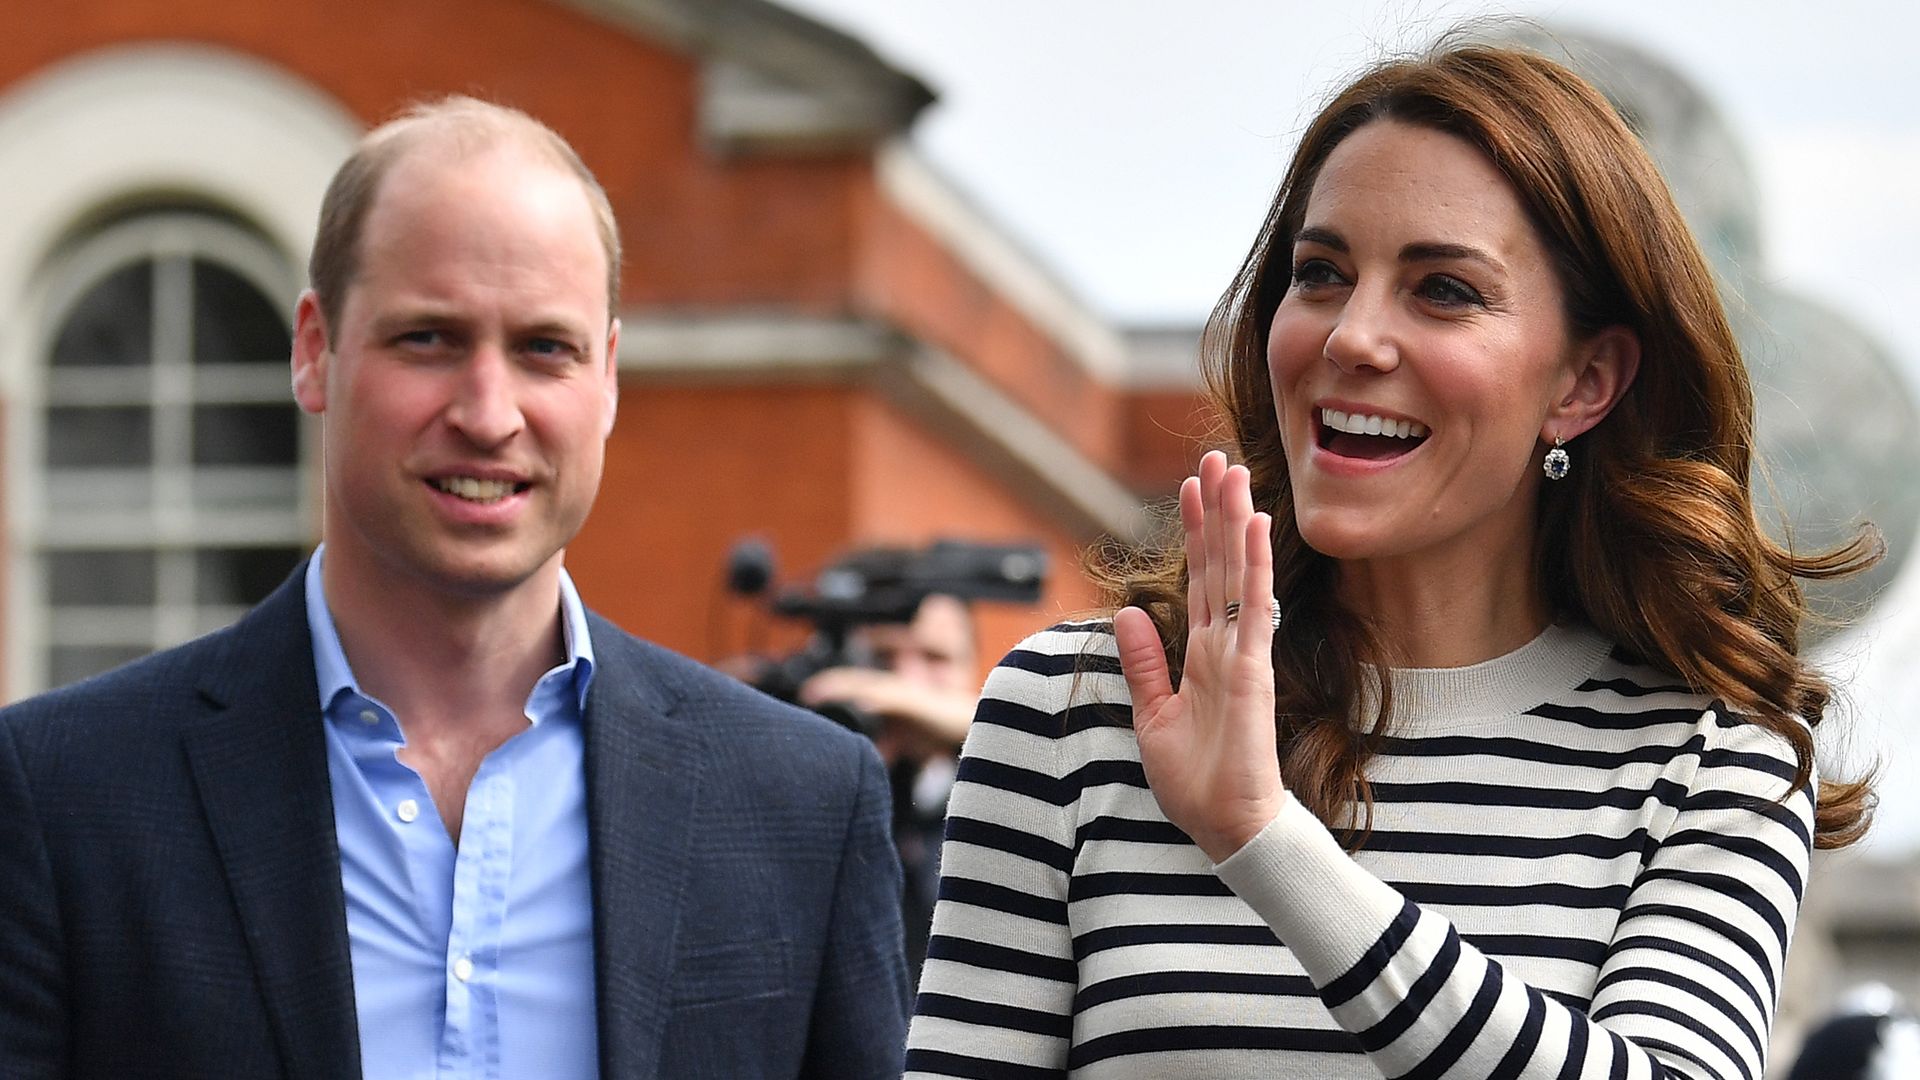 Kate Middleton waving in Greenwich as William looks on 